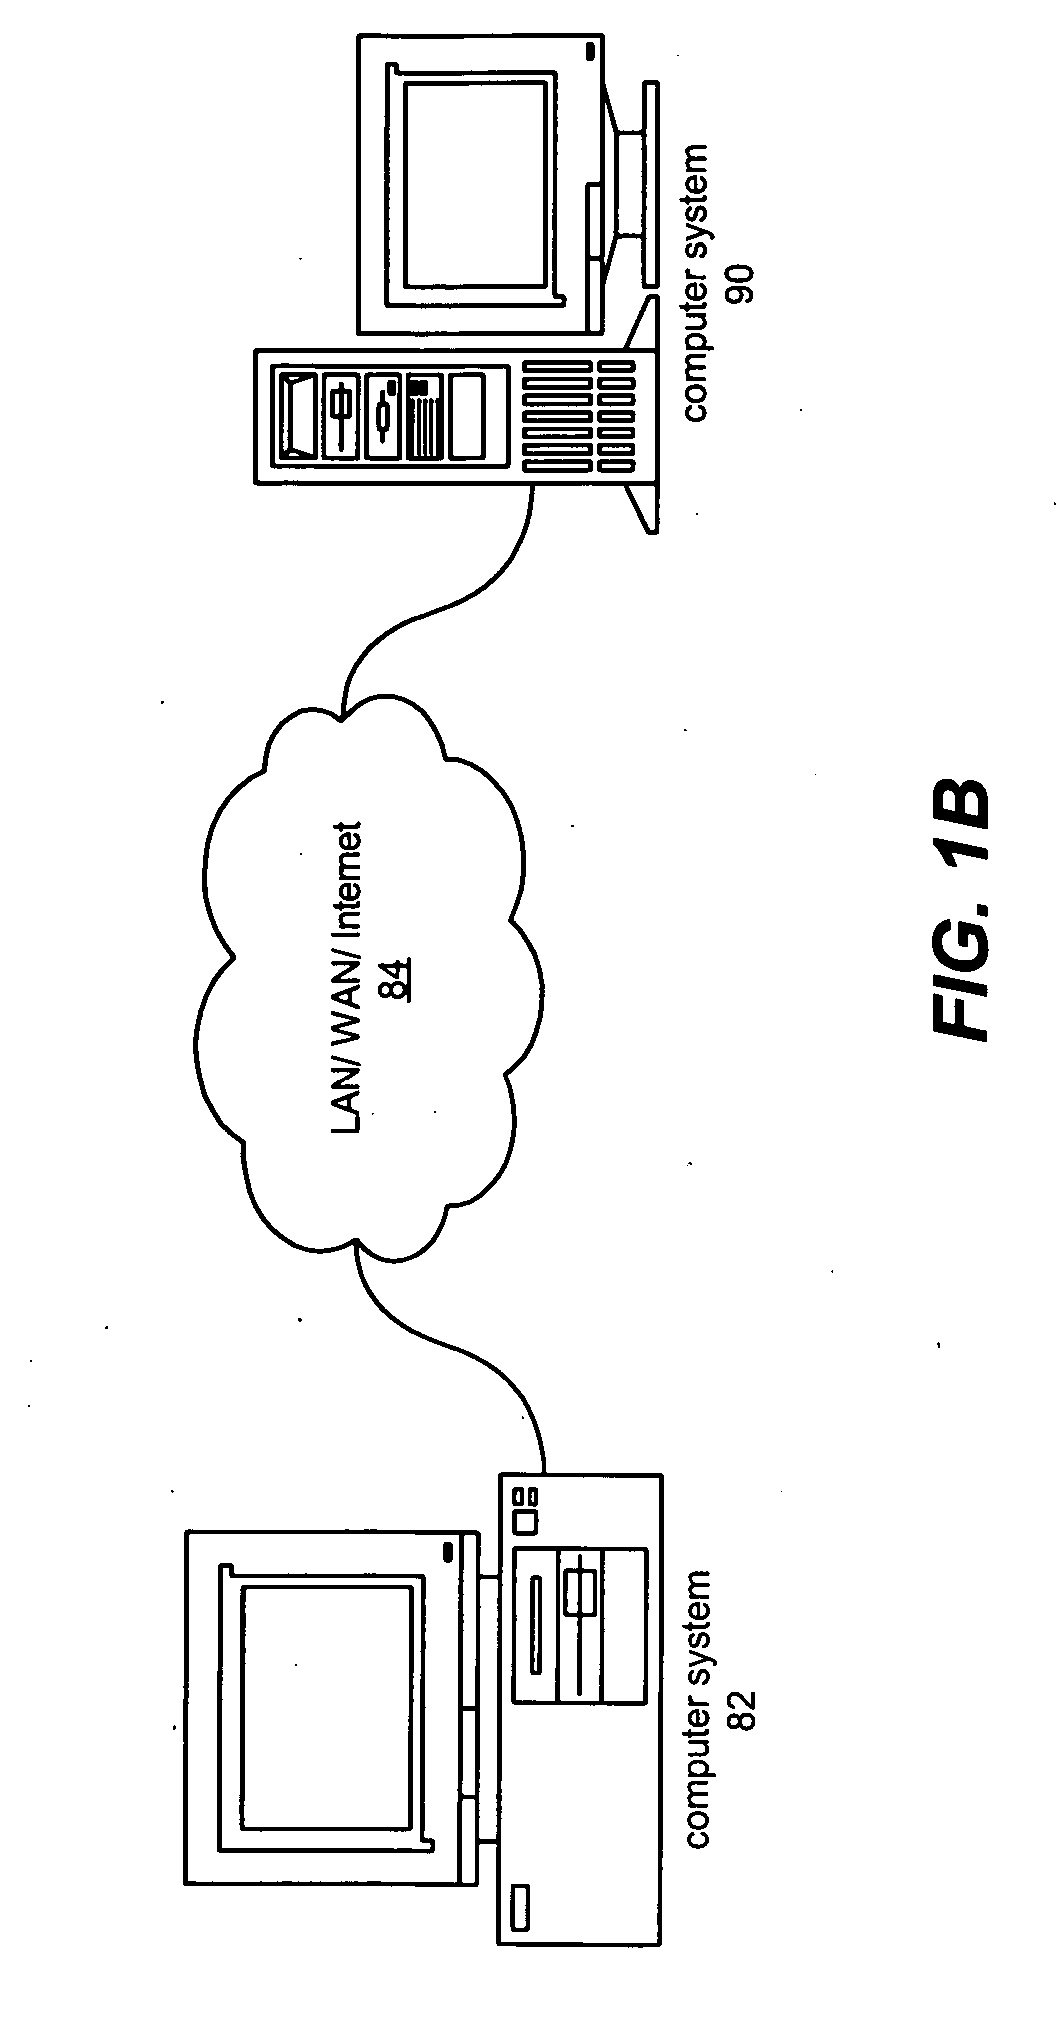 Implementation of packet-based communications in a reconfigurable hardware element